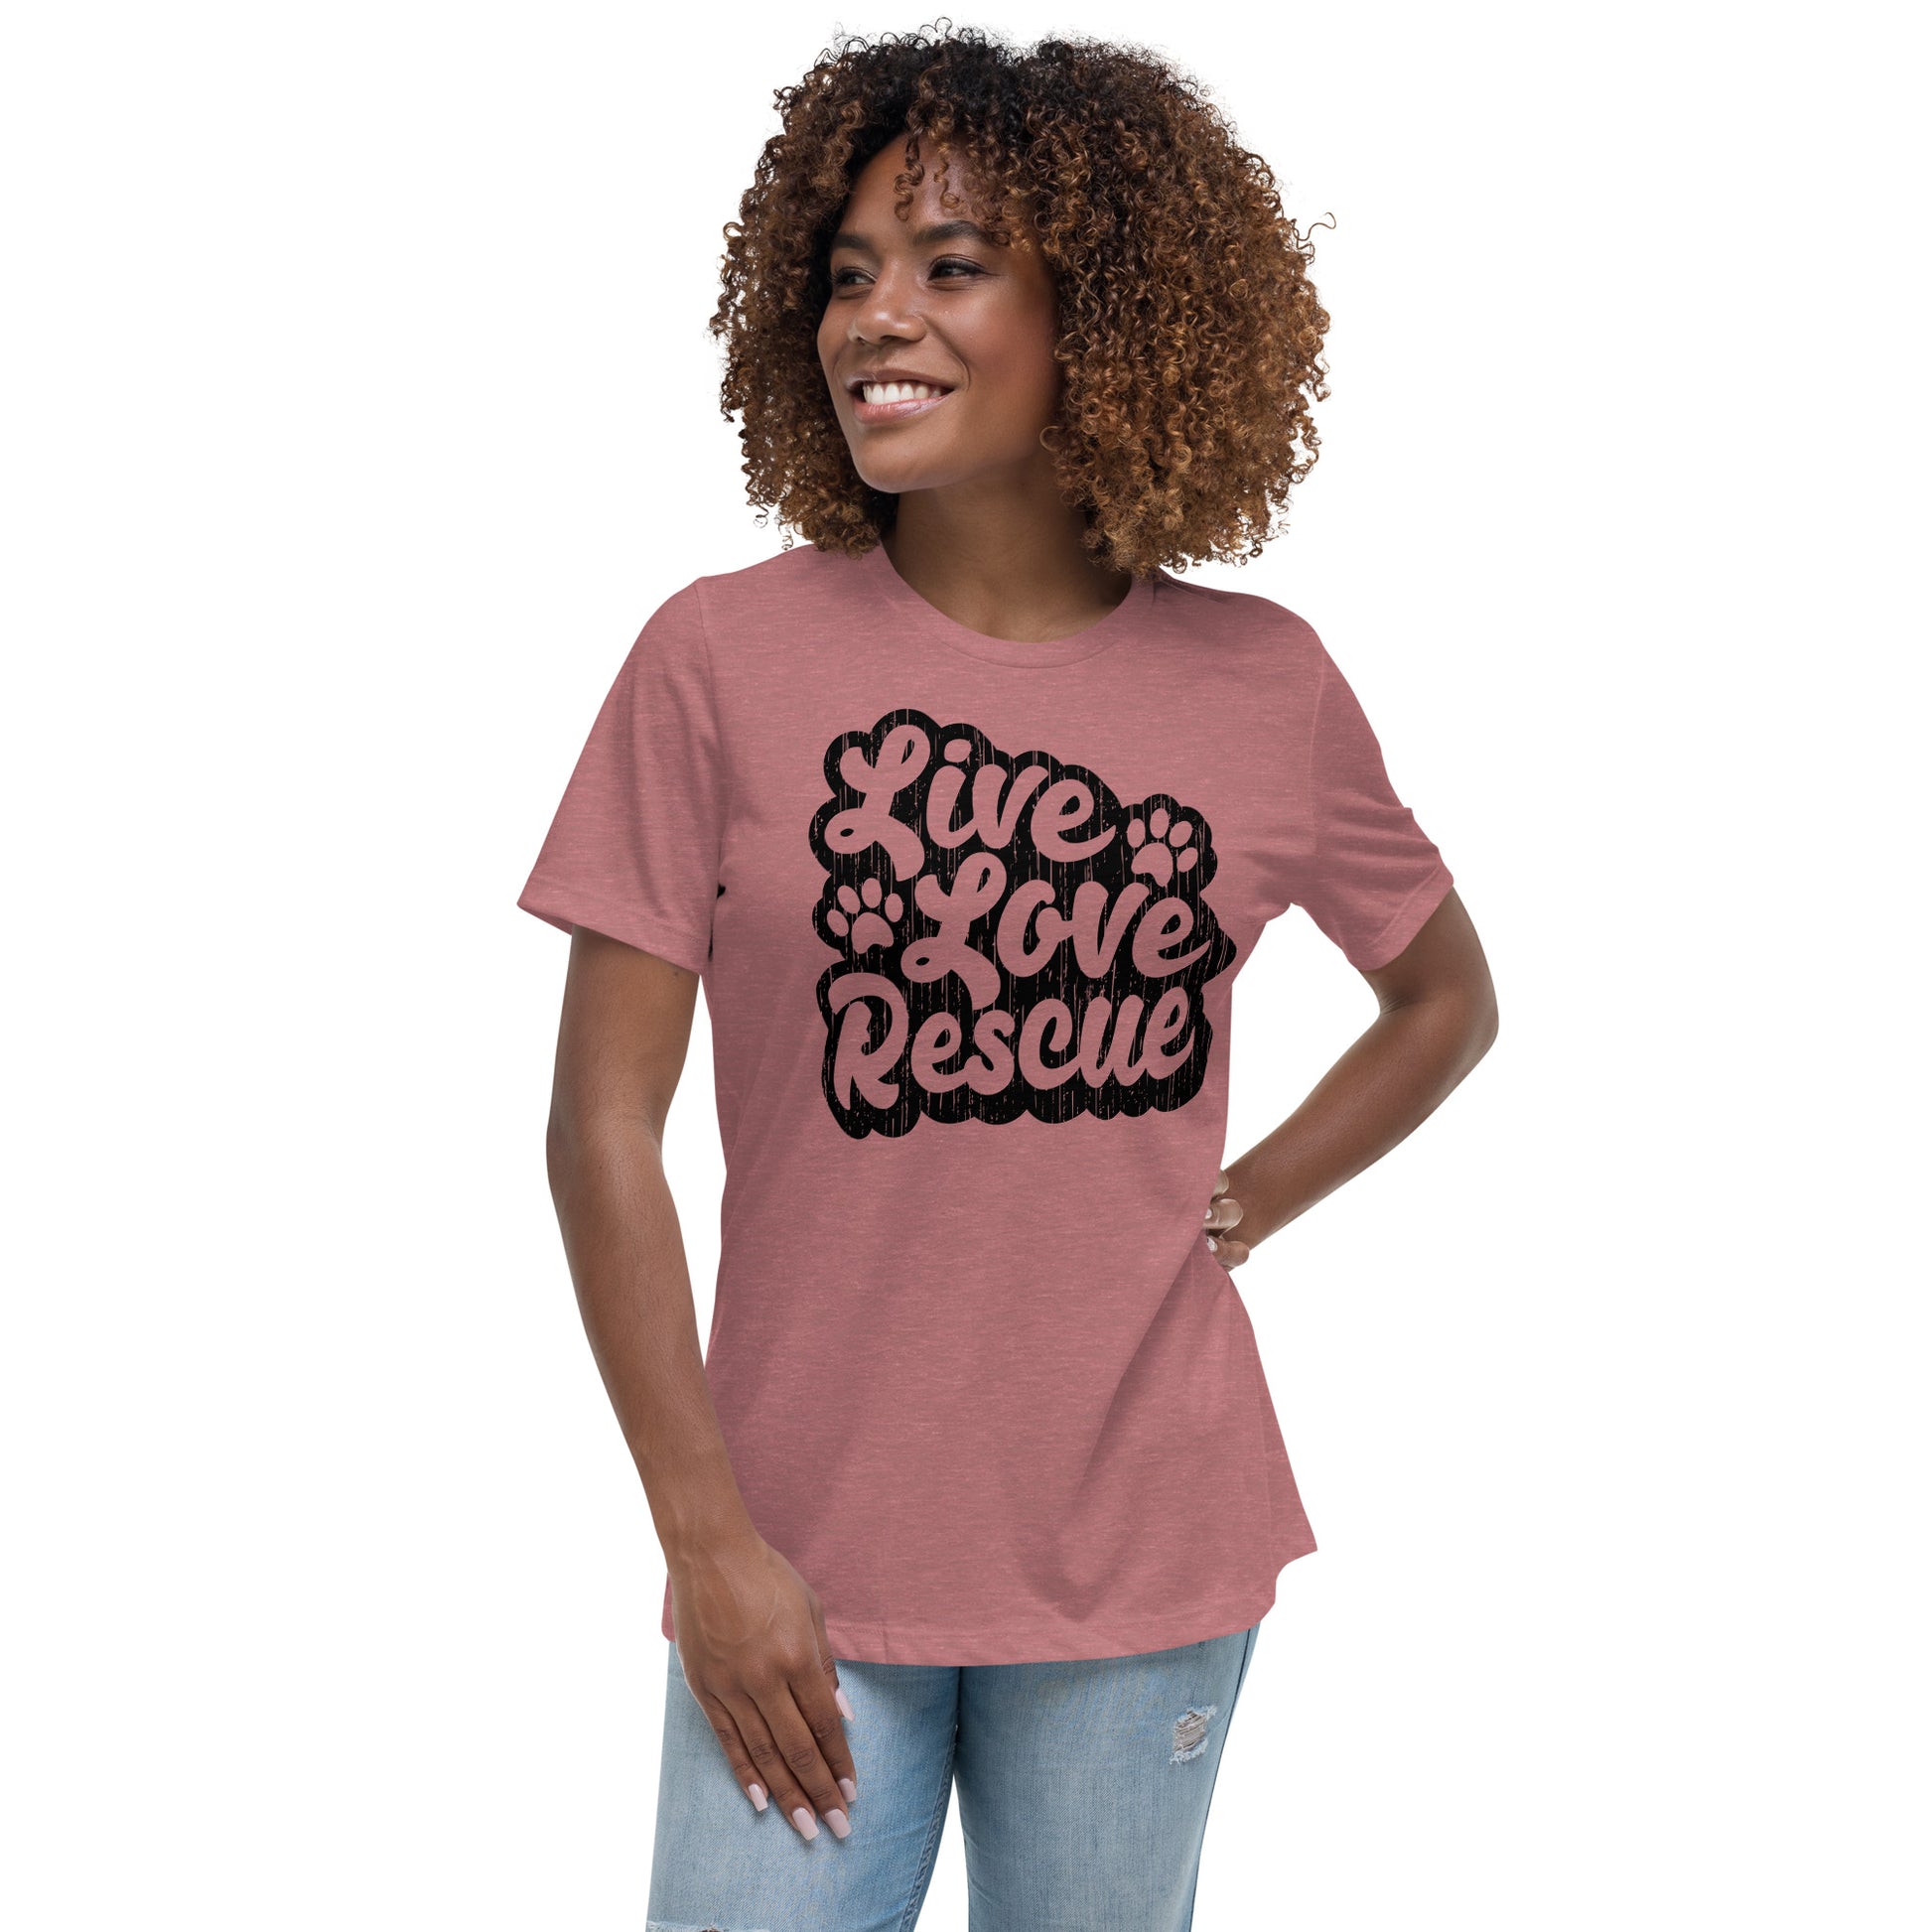 Live love rescue retro women’s relaxed fit t-shirts by Dog Artistry heather mauve color